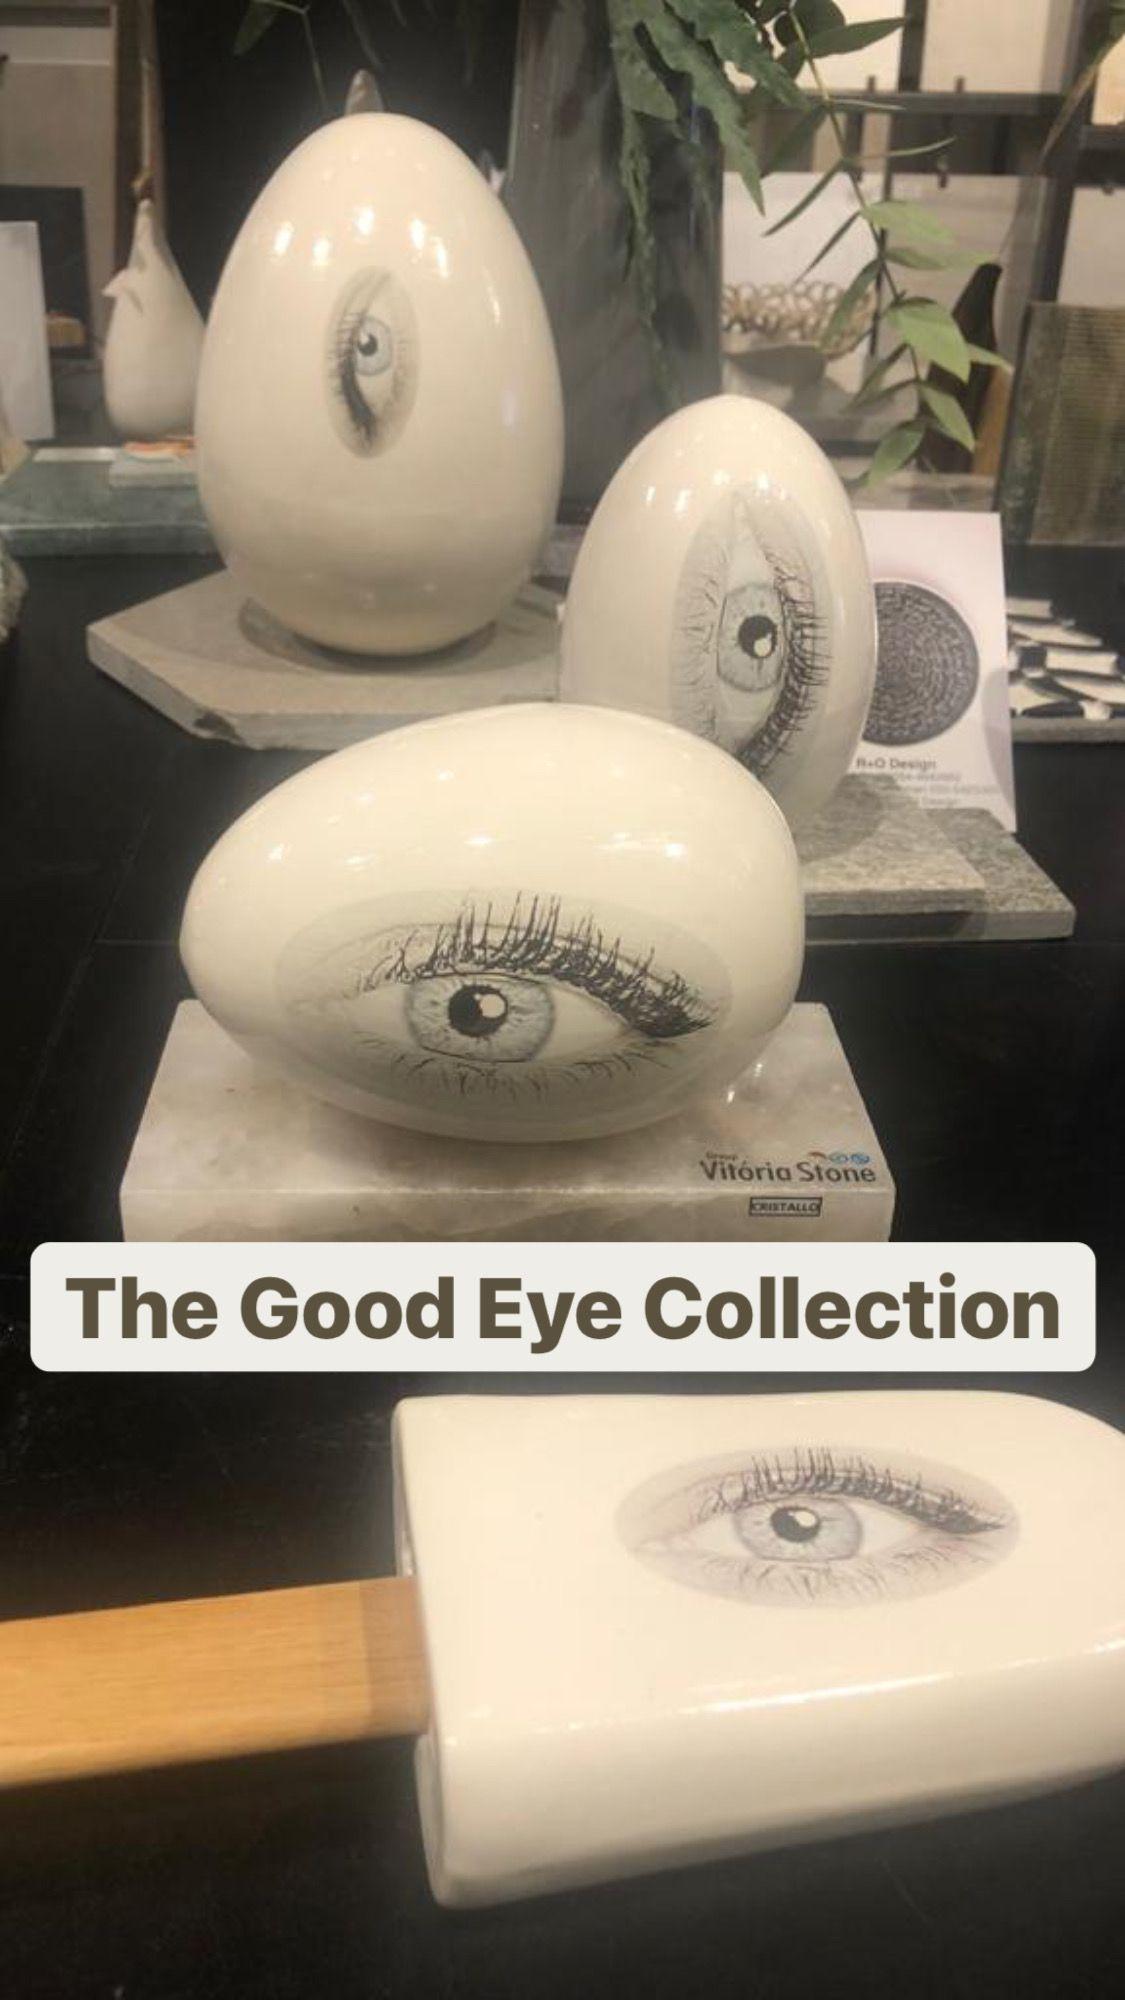 Good eye ceramic egg sculpture, Pair of 2 eggs. One standing and one lying down - Sculpture by Reli Smith and Osnat Yaffe Zimmerman